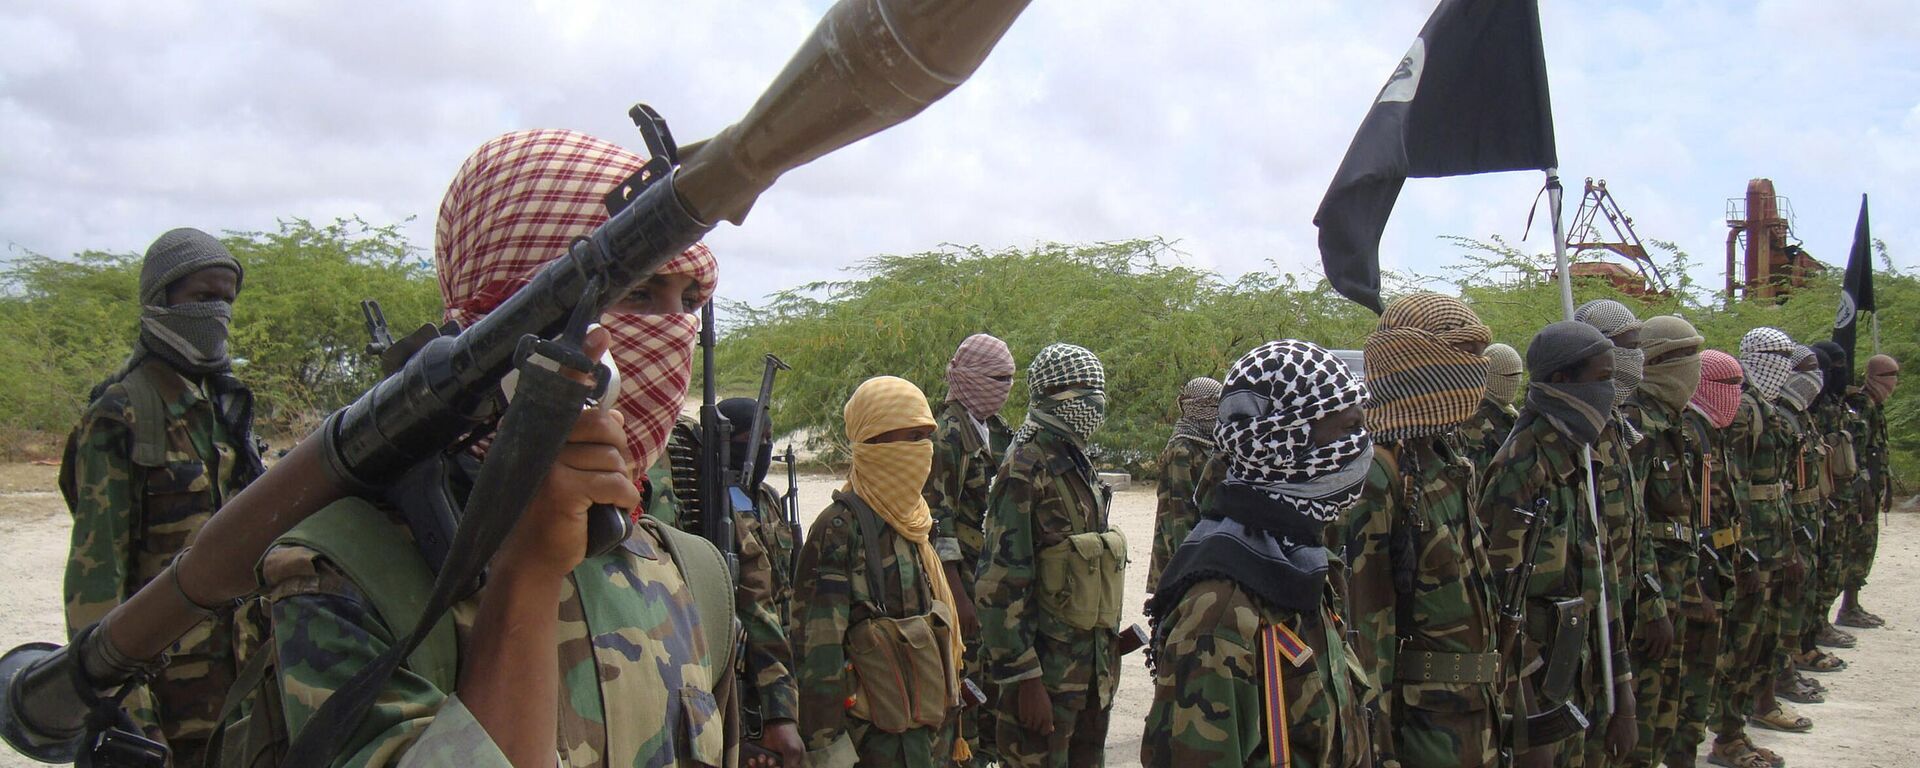 In this file photo of Thursday Oct.21, 2010, Al-Shabaab fighters display weapons as they conduct military exercises in northern Mogadishu, Somalia. The new al-Shabab video, called “The Path to Paradise,” promises more in a series spotlighting recruits from Minnesota who abandoned the comforts of home in order to wage jihad against foreign troops in Somalia. The video, which was originally available on YouTube but has since been taken down because it violates the website’s policy on violence, features masked men performing military drills in dusty camps as well as what appears to be footage of staged battles among Mogadishu’s ruined buildings. - Sputnik International, 1920, 08.01.2023